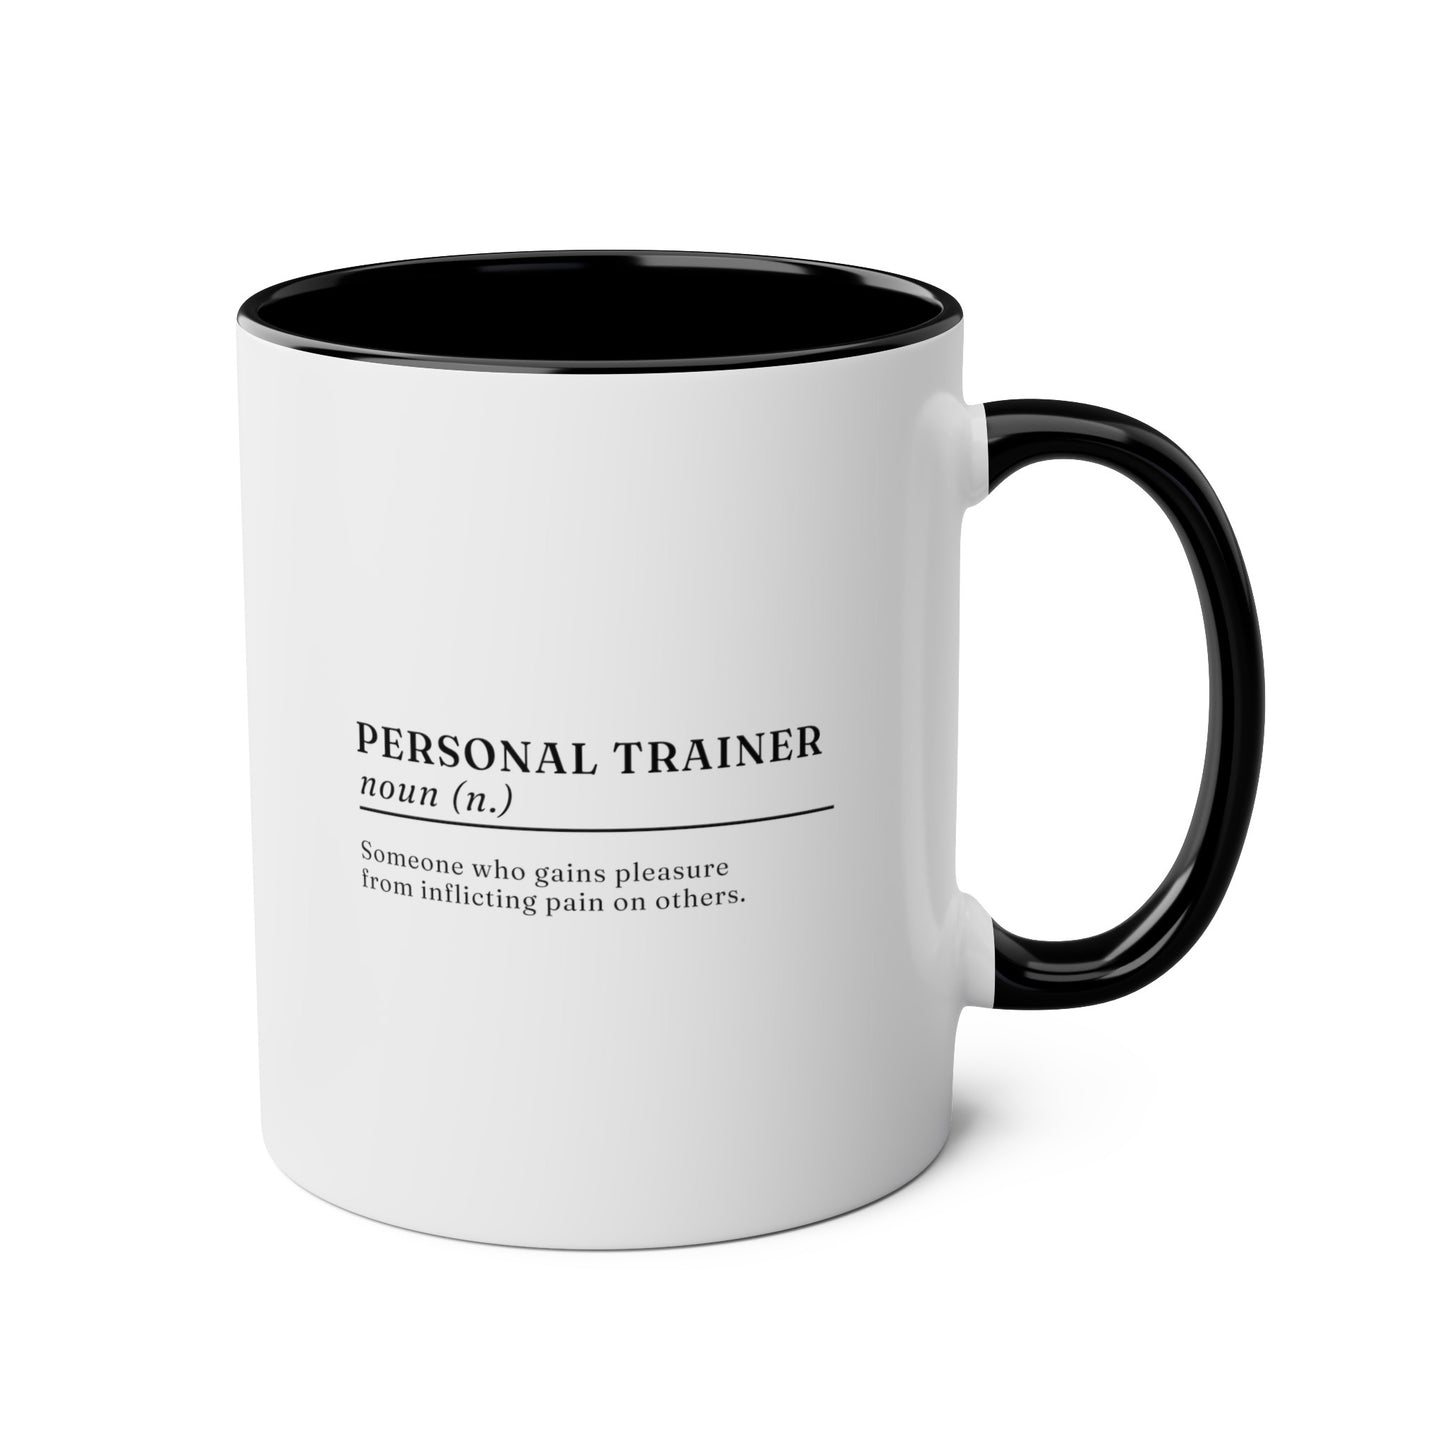 Personal Trainer Definition 11oz white with black accent funny large coffee mug gift for fitness instructor exercise workout waveywares wavey wares wavywares wavy wares